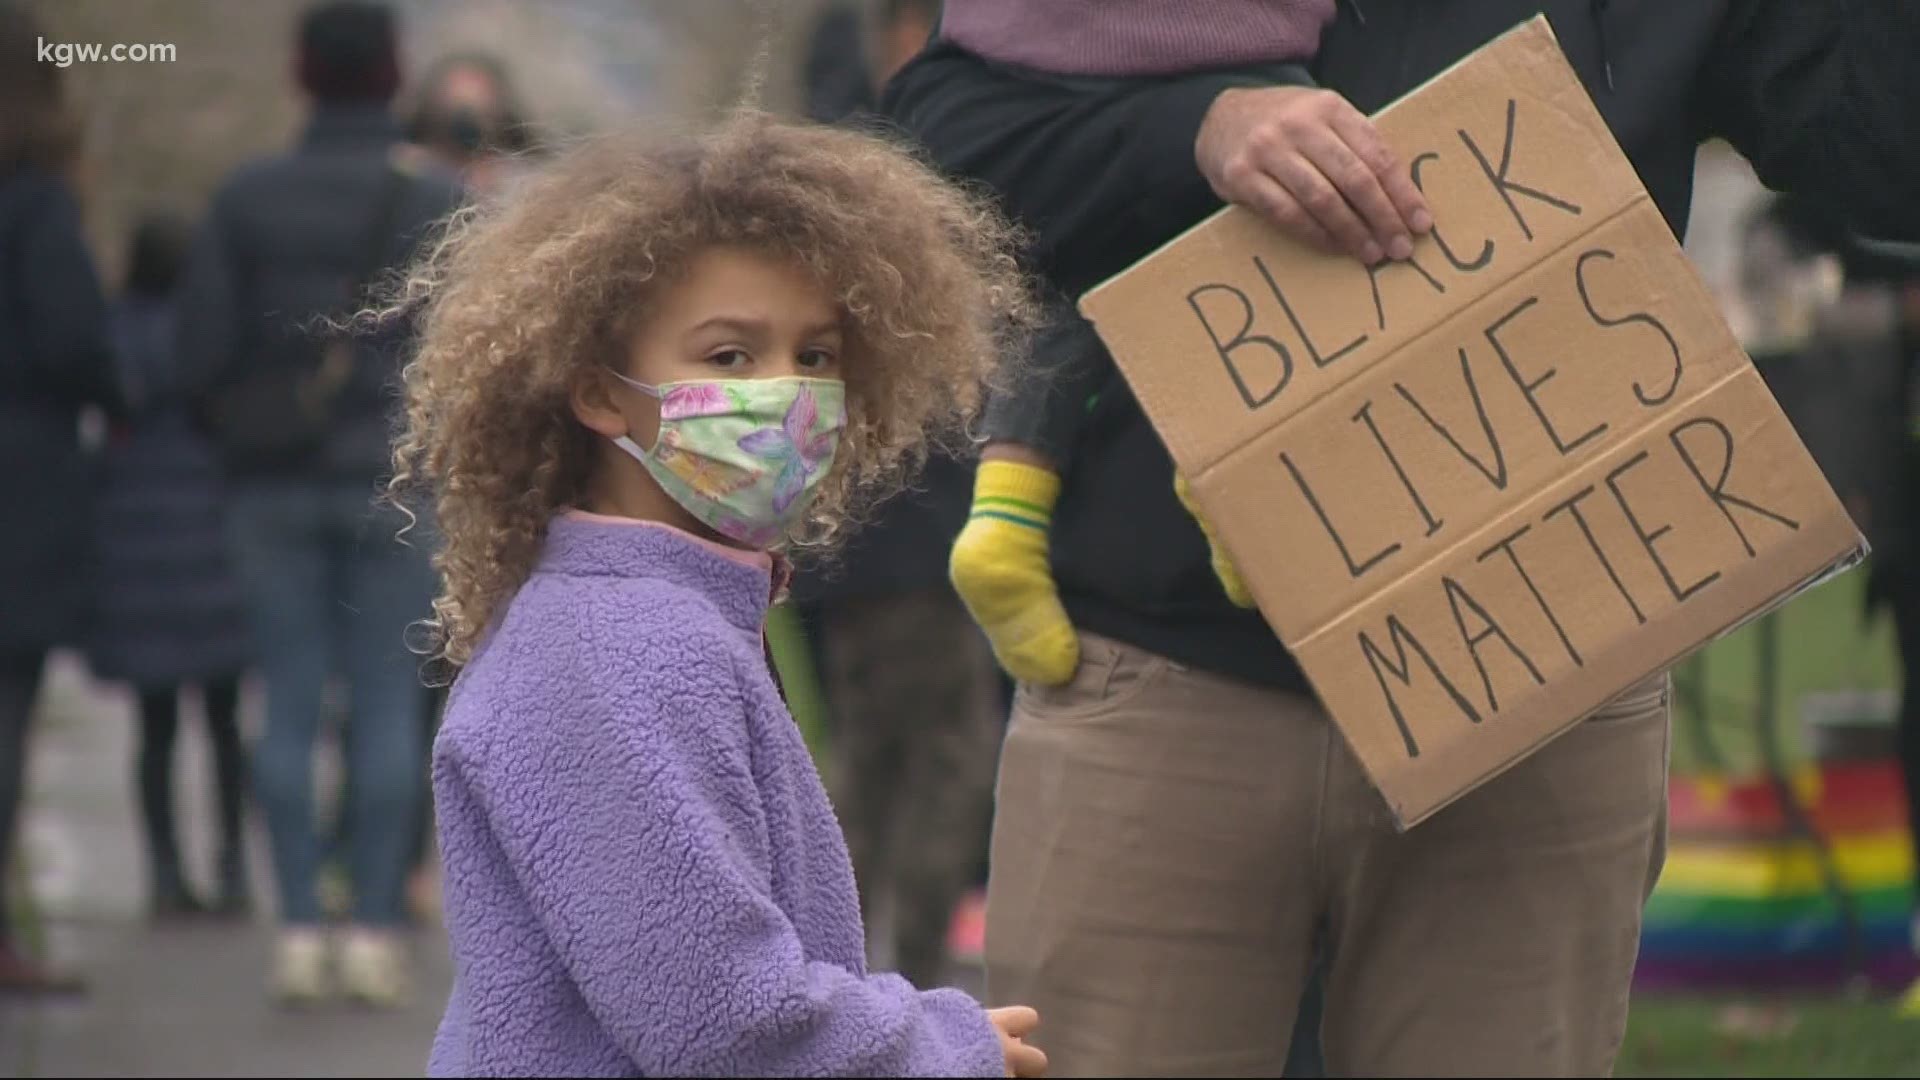 A group of 5th graders organized a Black Lives Matter parade in the Woodlawn neighborhood.